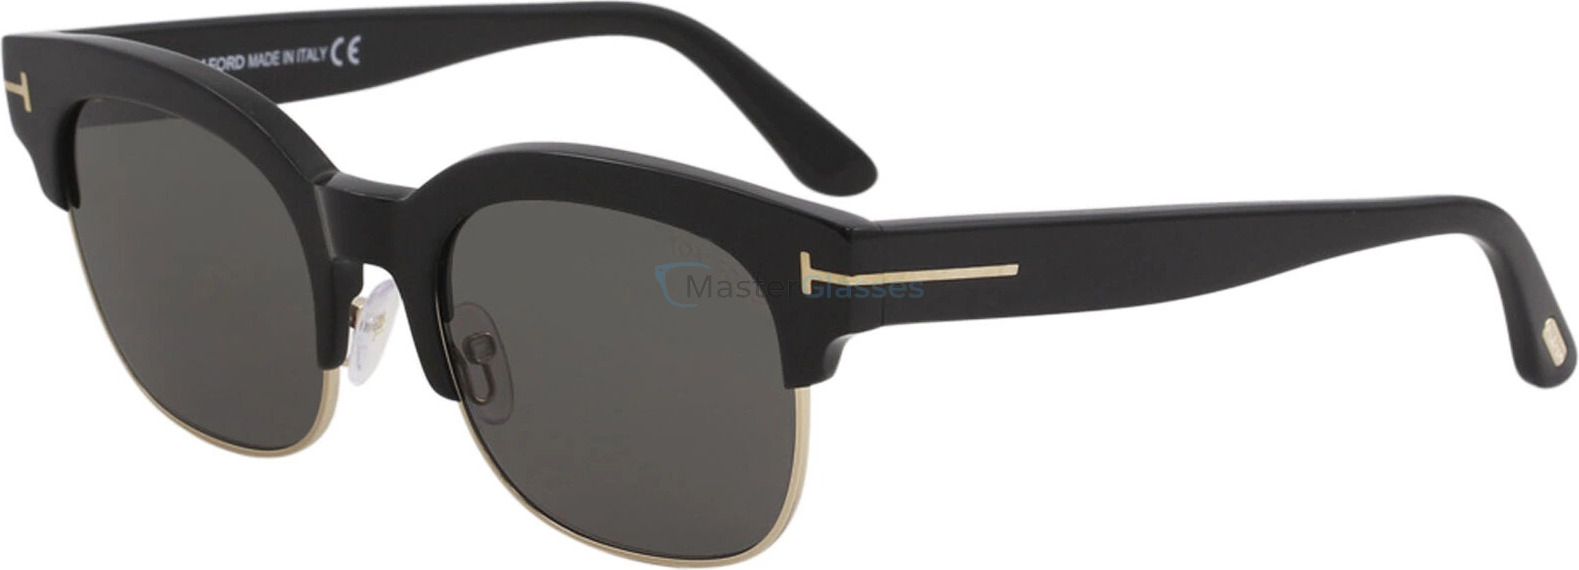 Tom Ford TF 597 01D 53 HARRY-02